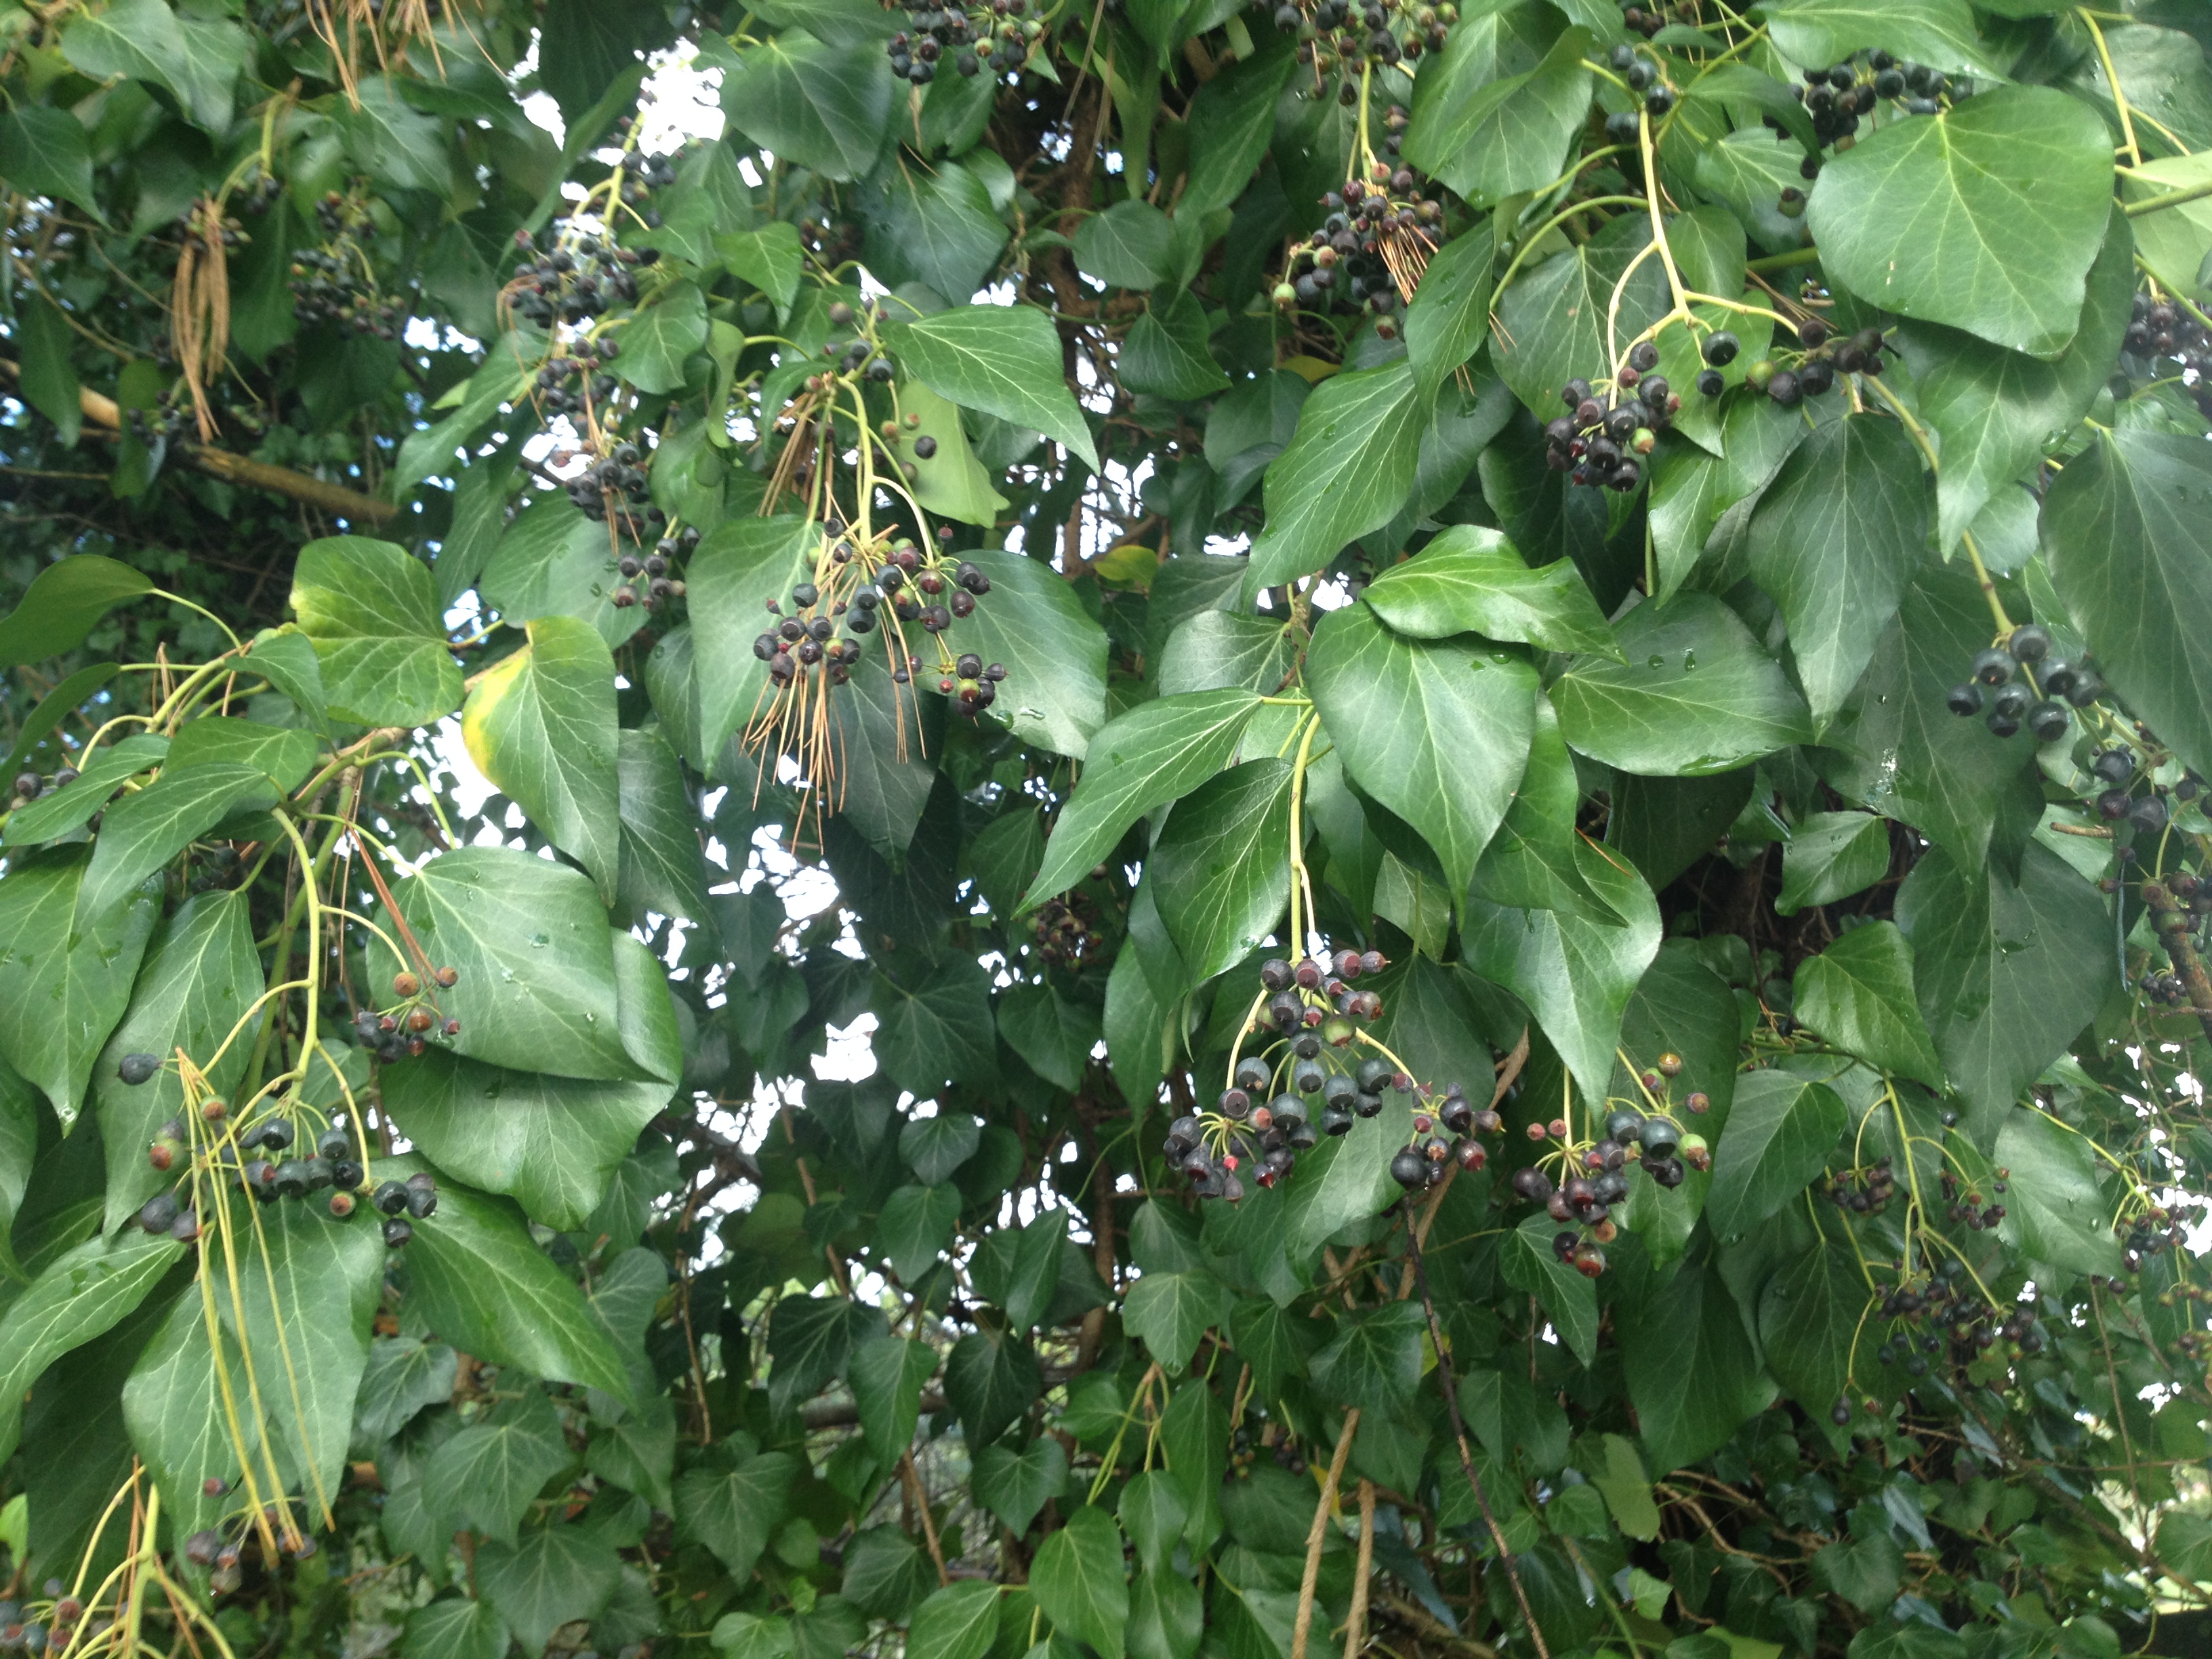 What are these berries? It's an invasive vine that grows on trees ...